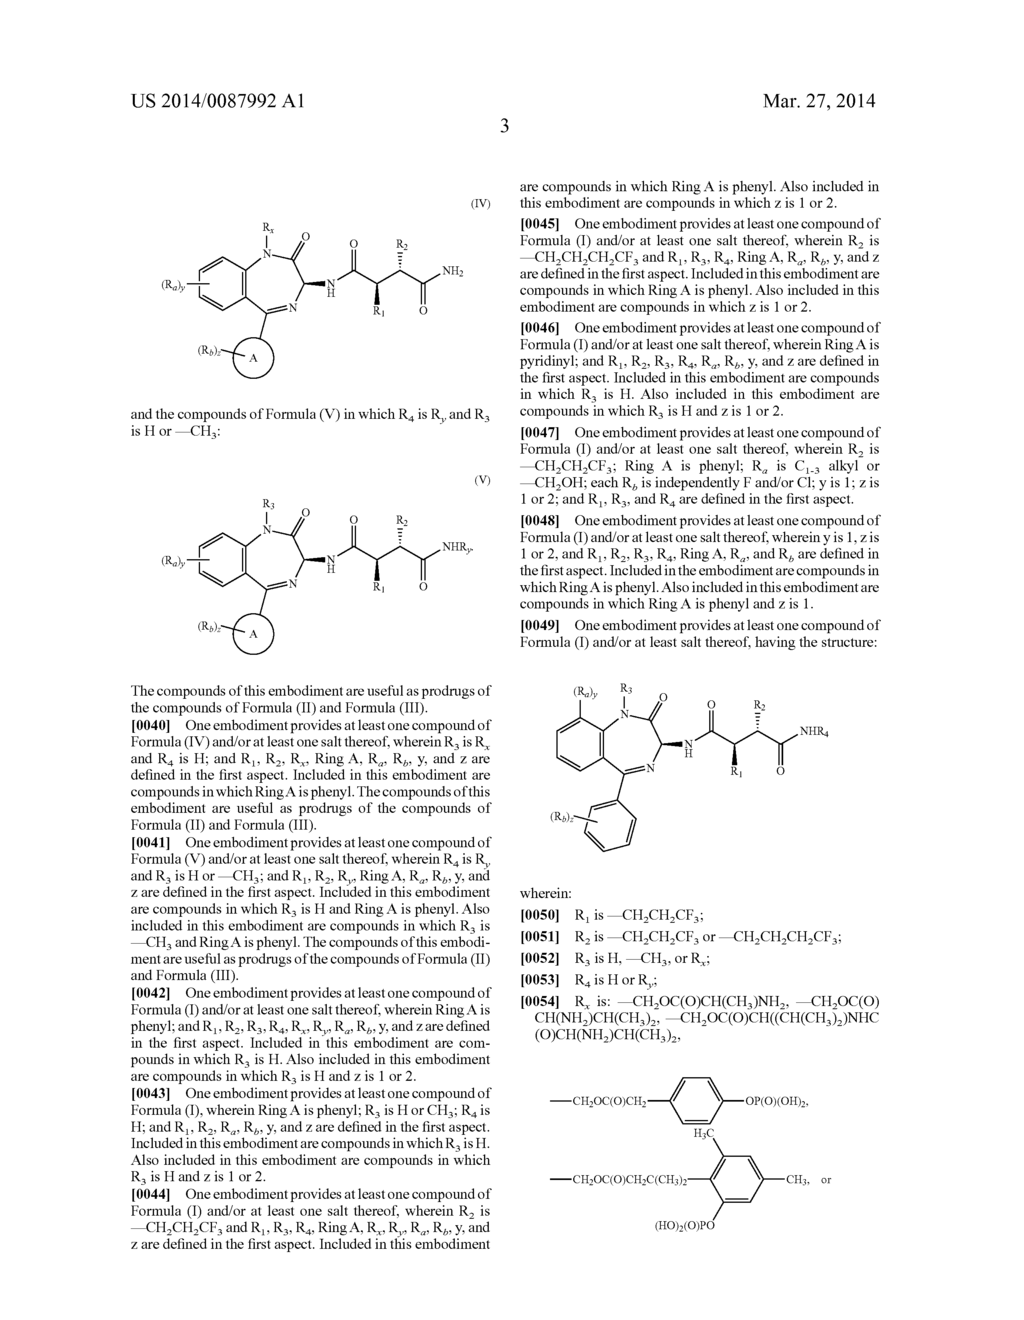 BIS(FLUOROALKYL)-1,4-BENZODIAZEPINONE COMPOUNDS AND PRODRUGS THEREOF - diagram, schematic, and image 10